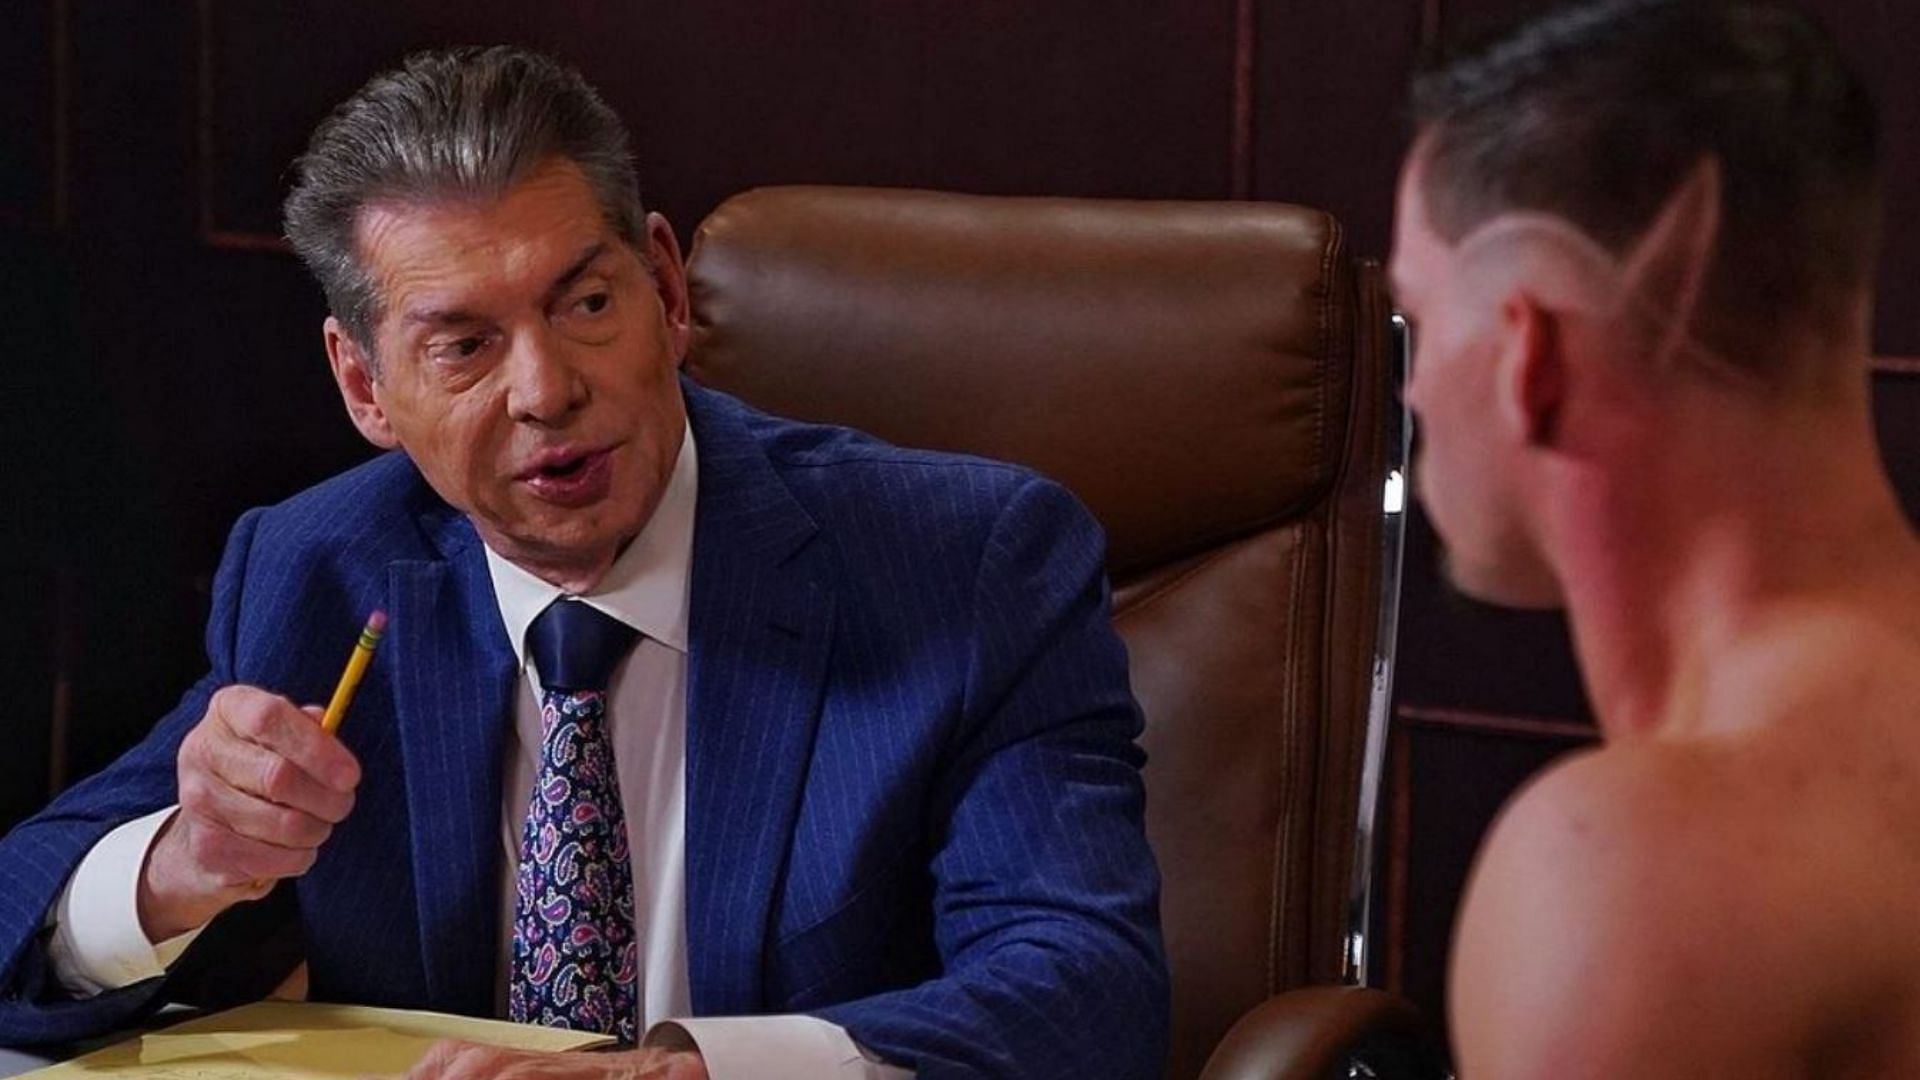 Vince McMahon announced his retirement earlier this year